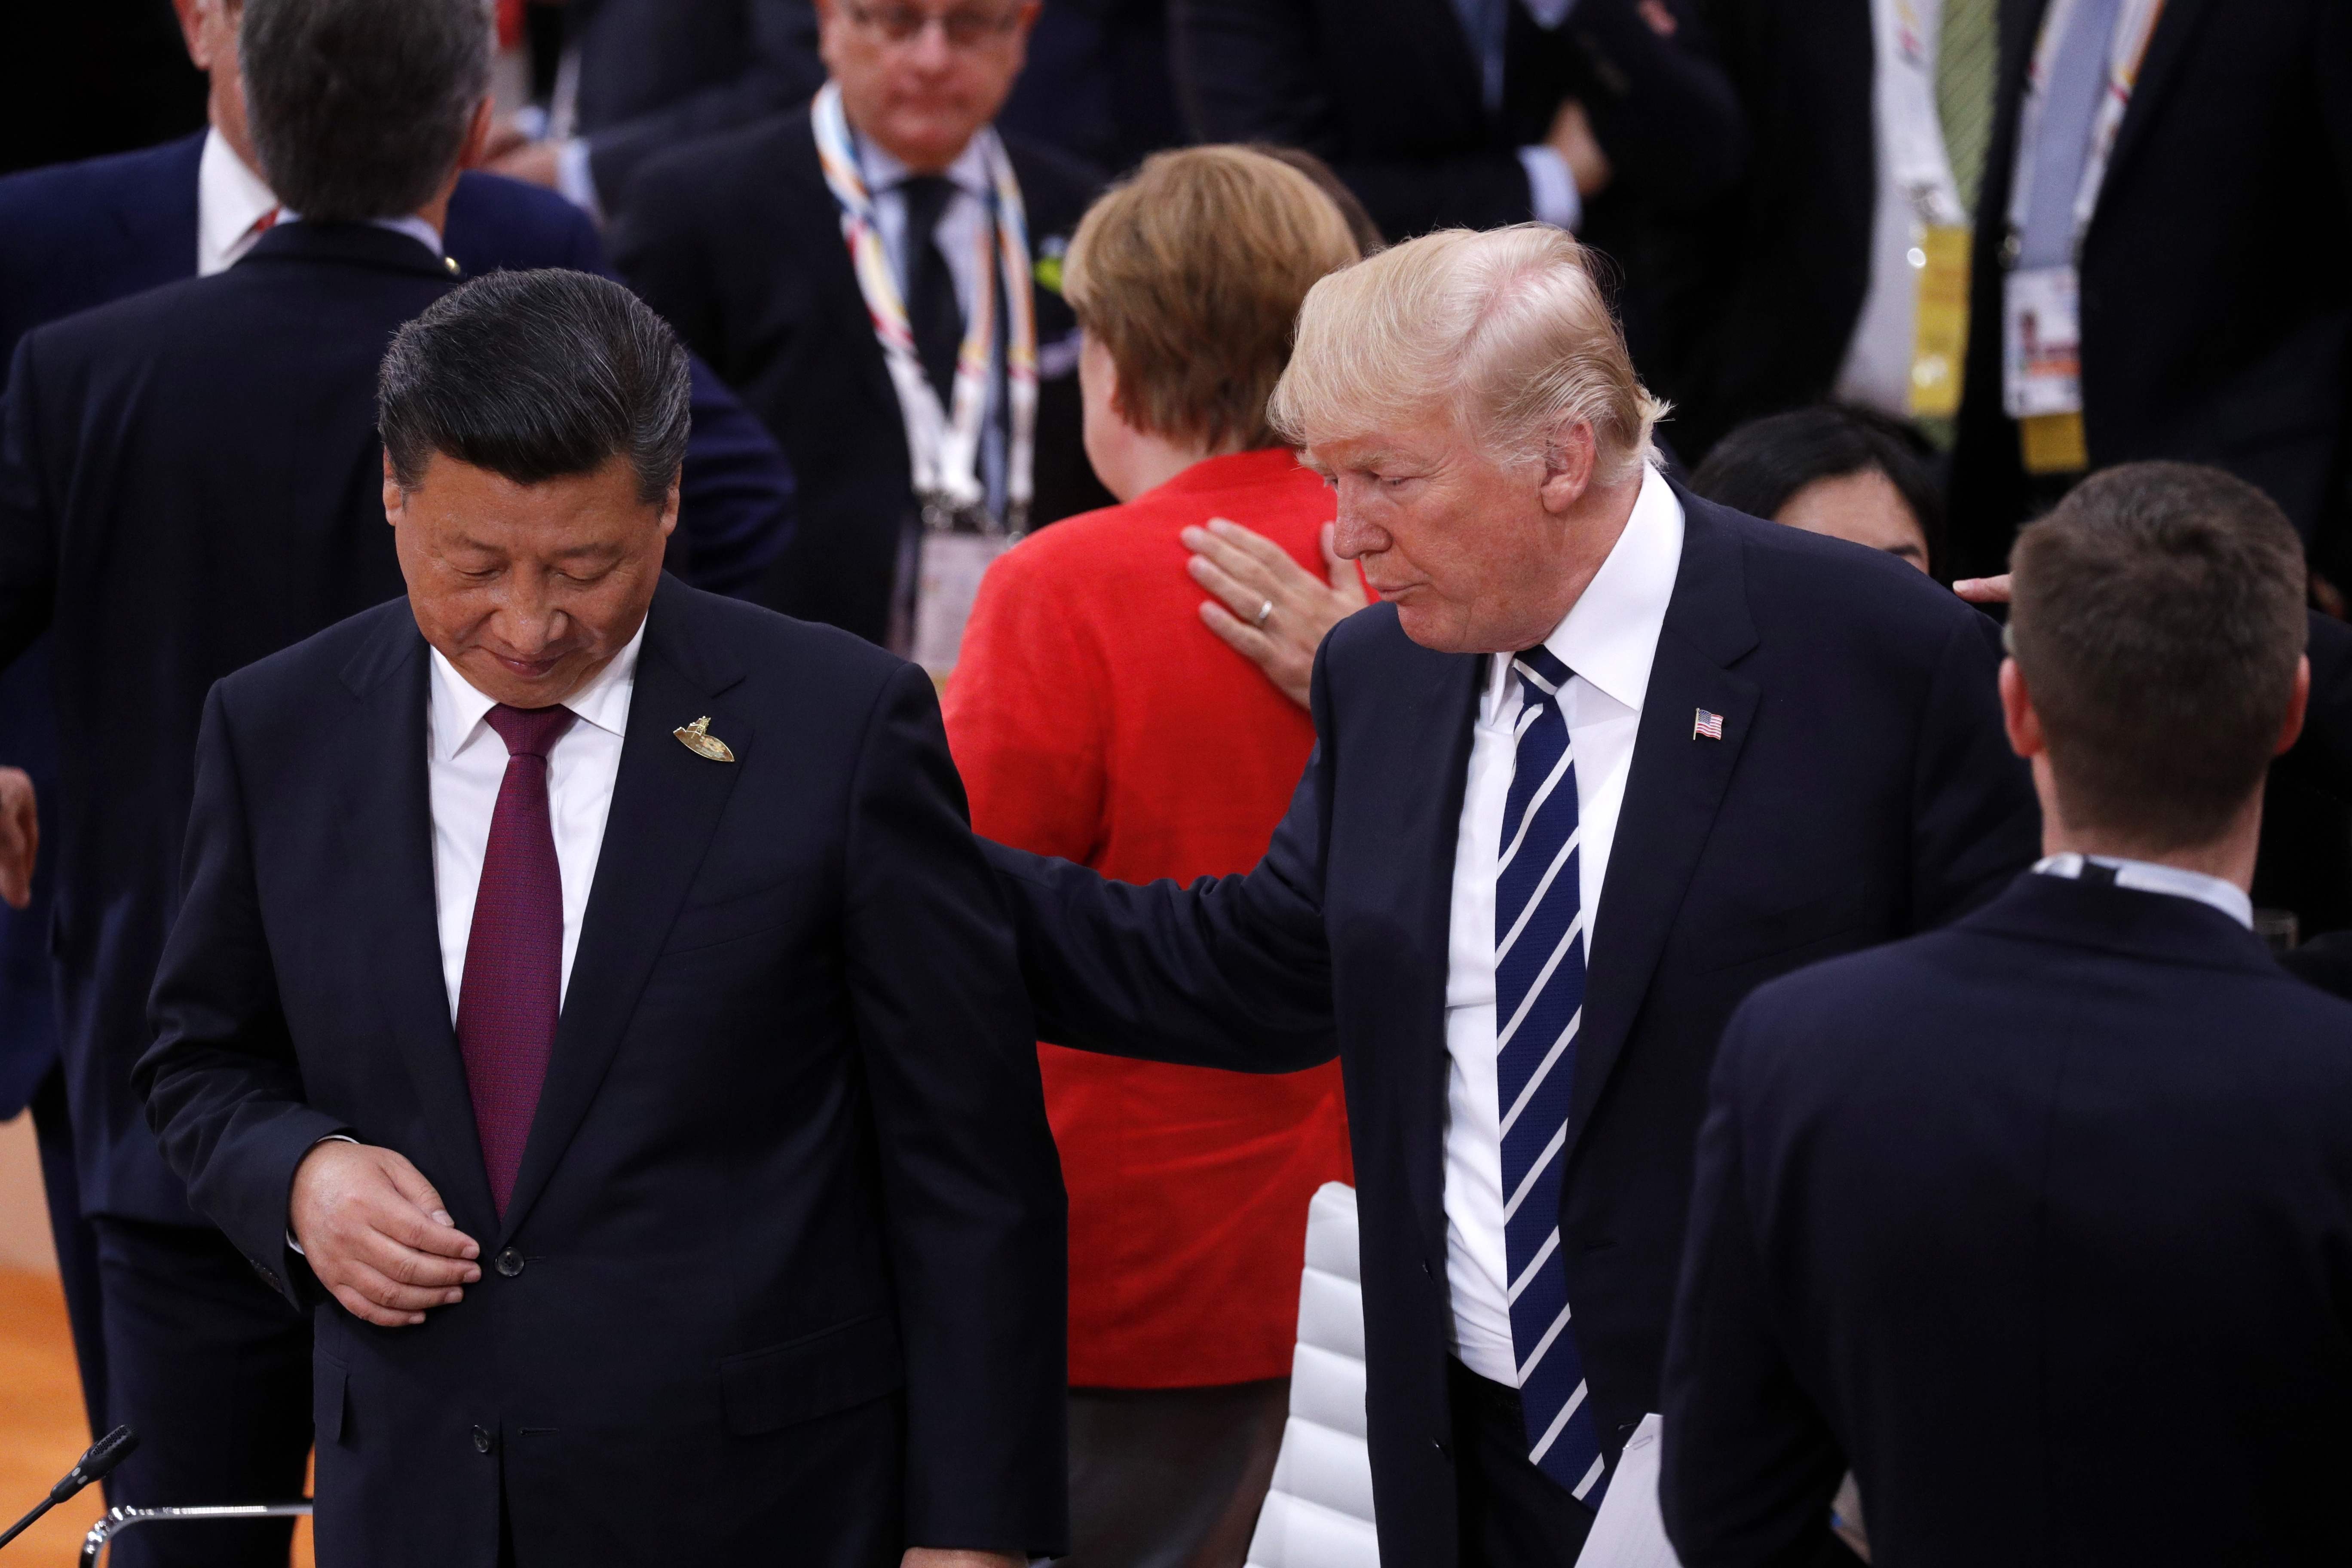 US President Donald Trump has a word with President Xi Jinping at the start of the first working session of the G20 meeting in Hamburg on July 7. The biggest flashpoint in US relations with a rising China is without question North Korea. Photo: AFP